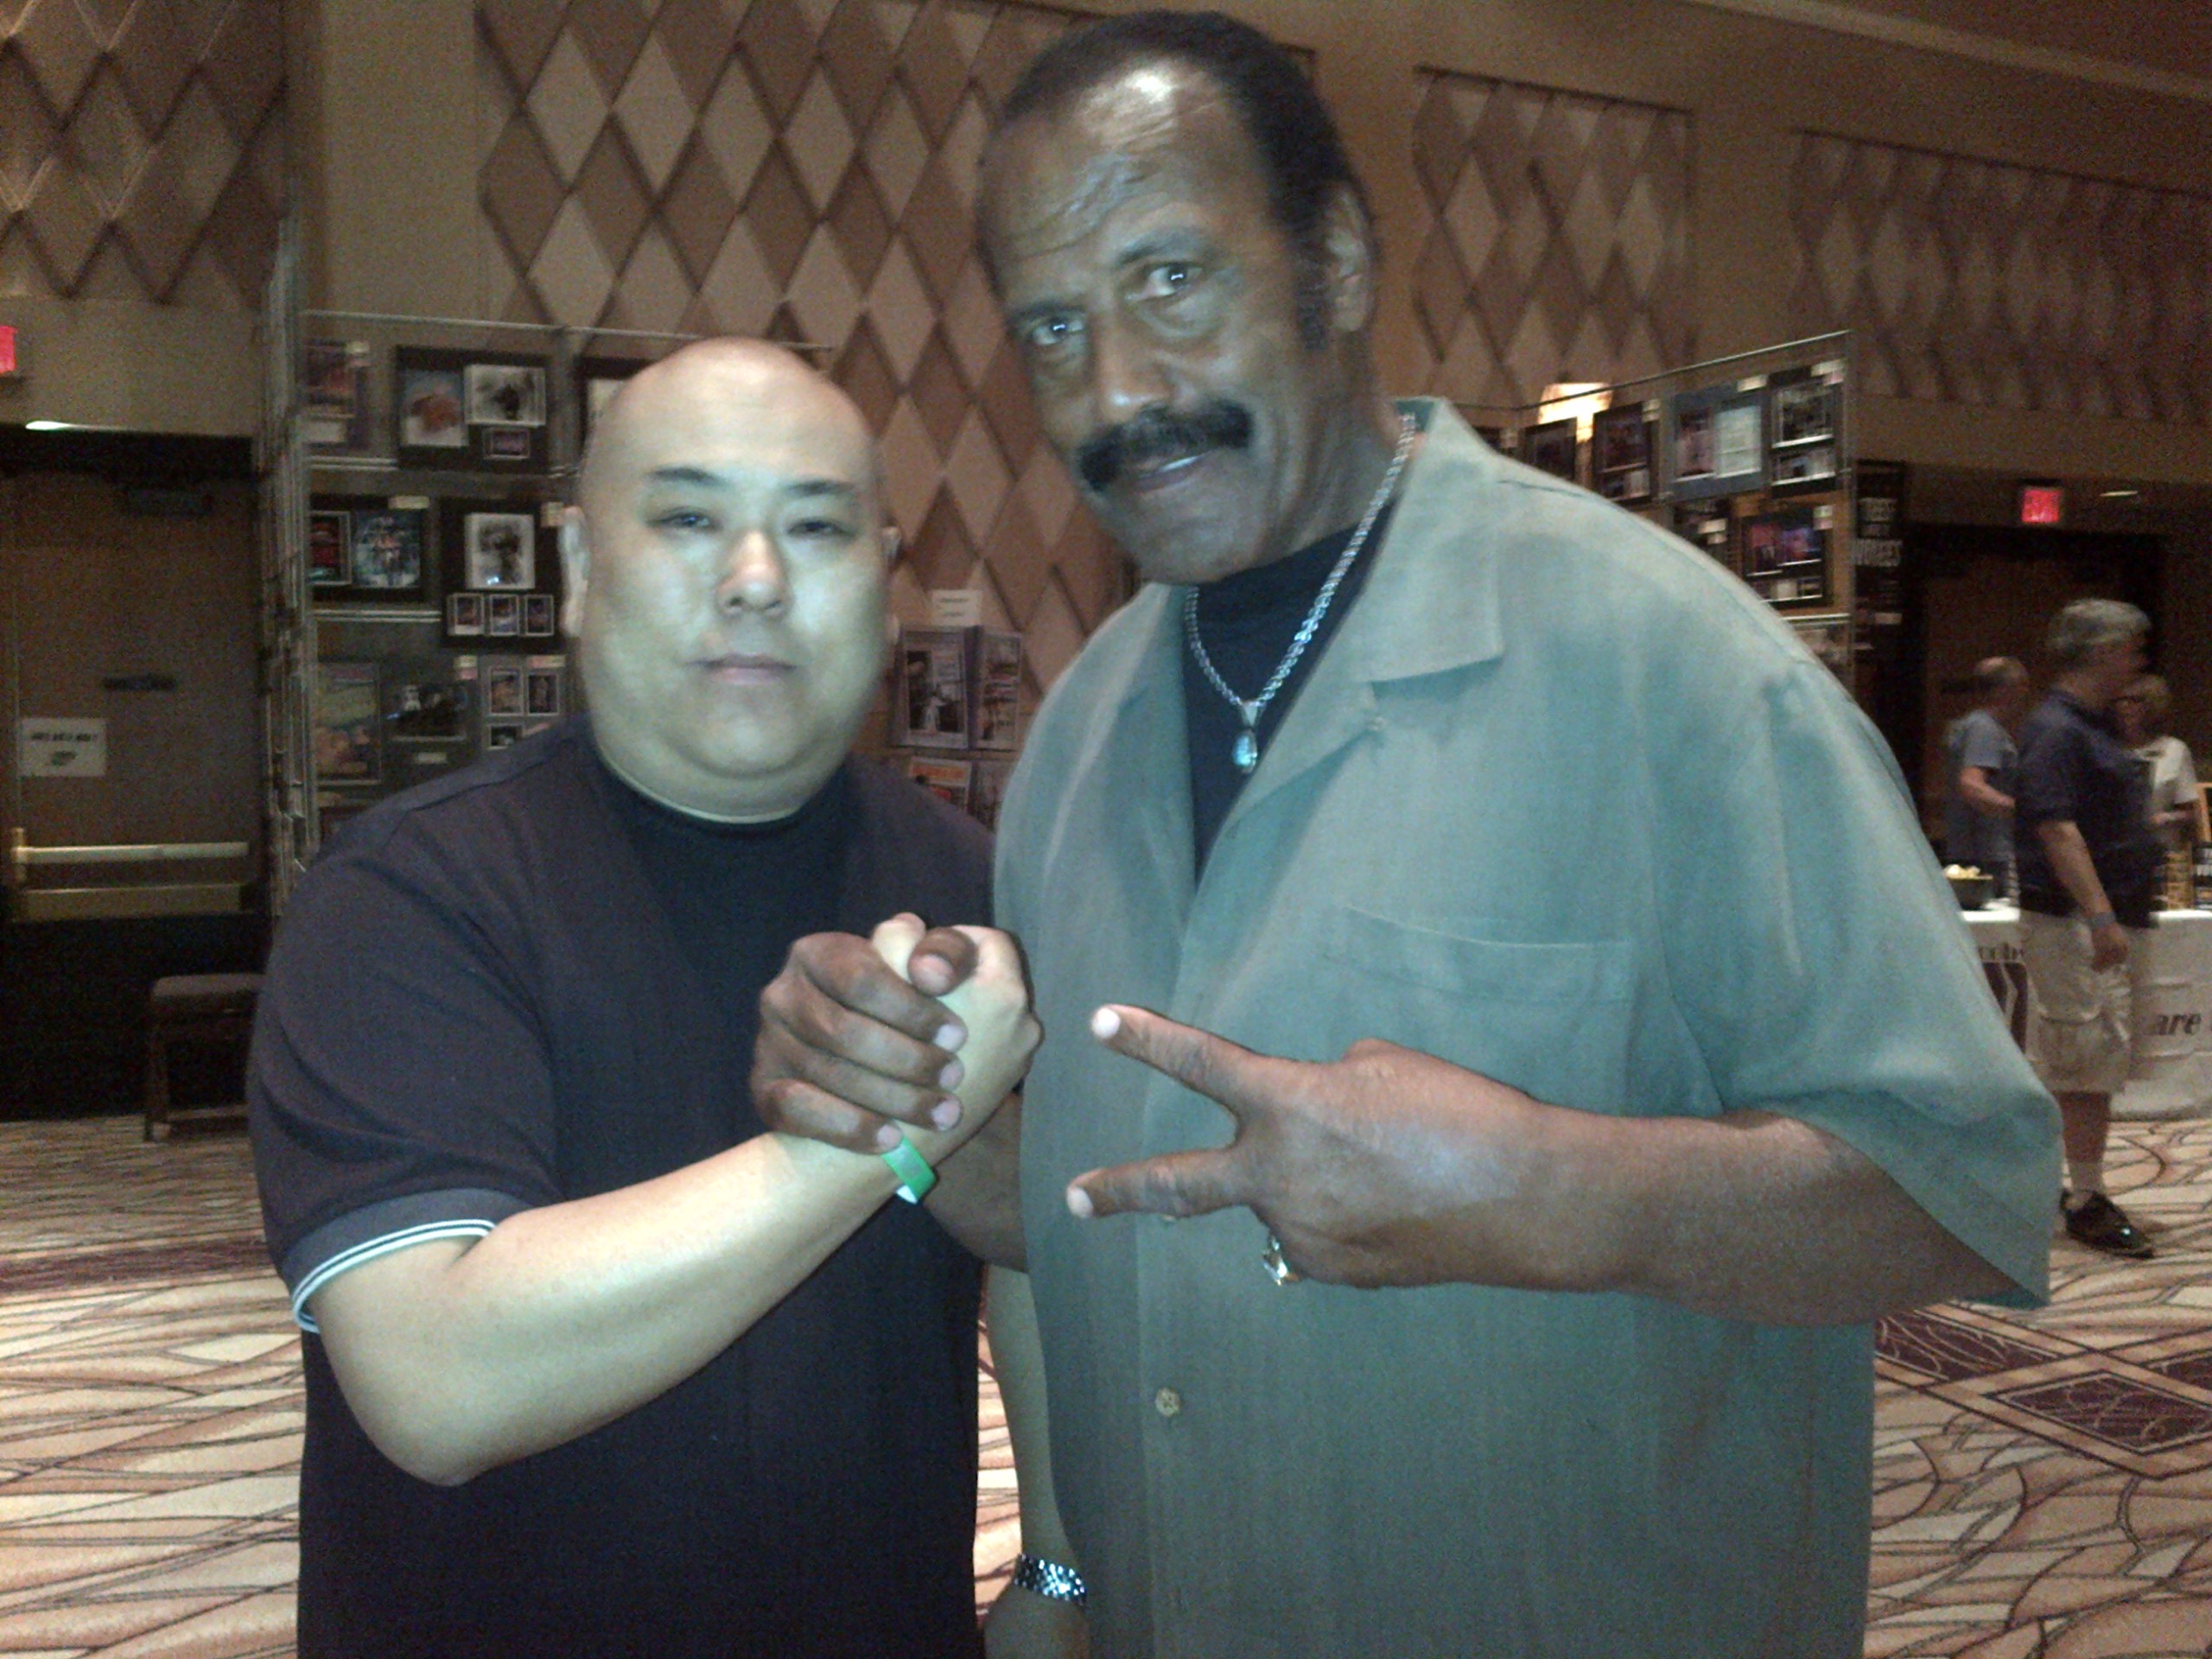 I am with Fred Williamson the great actor who played 